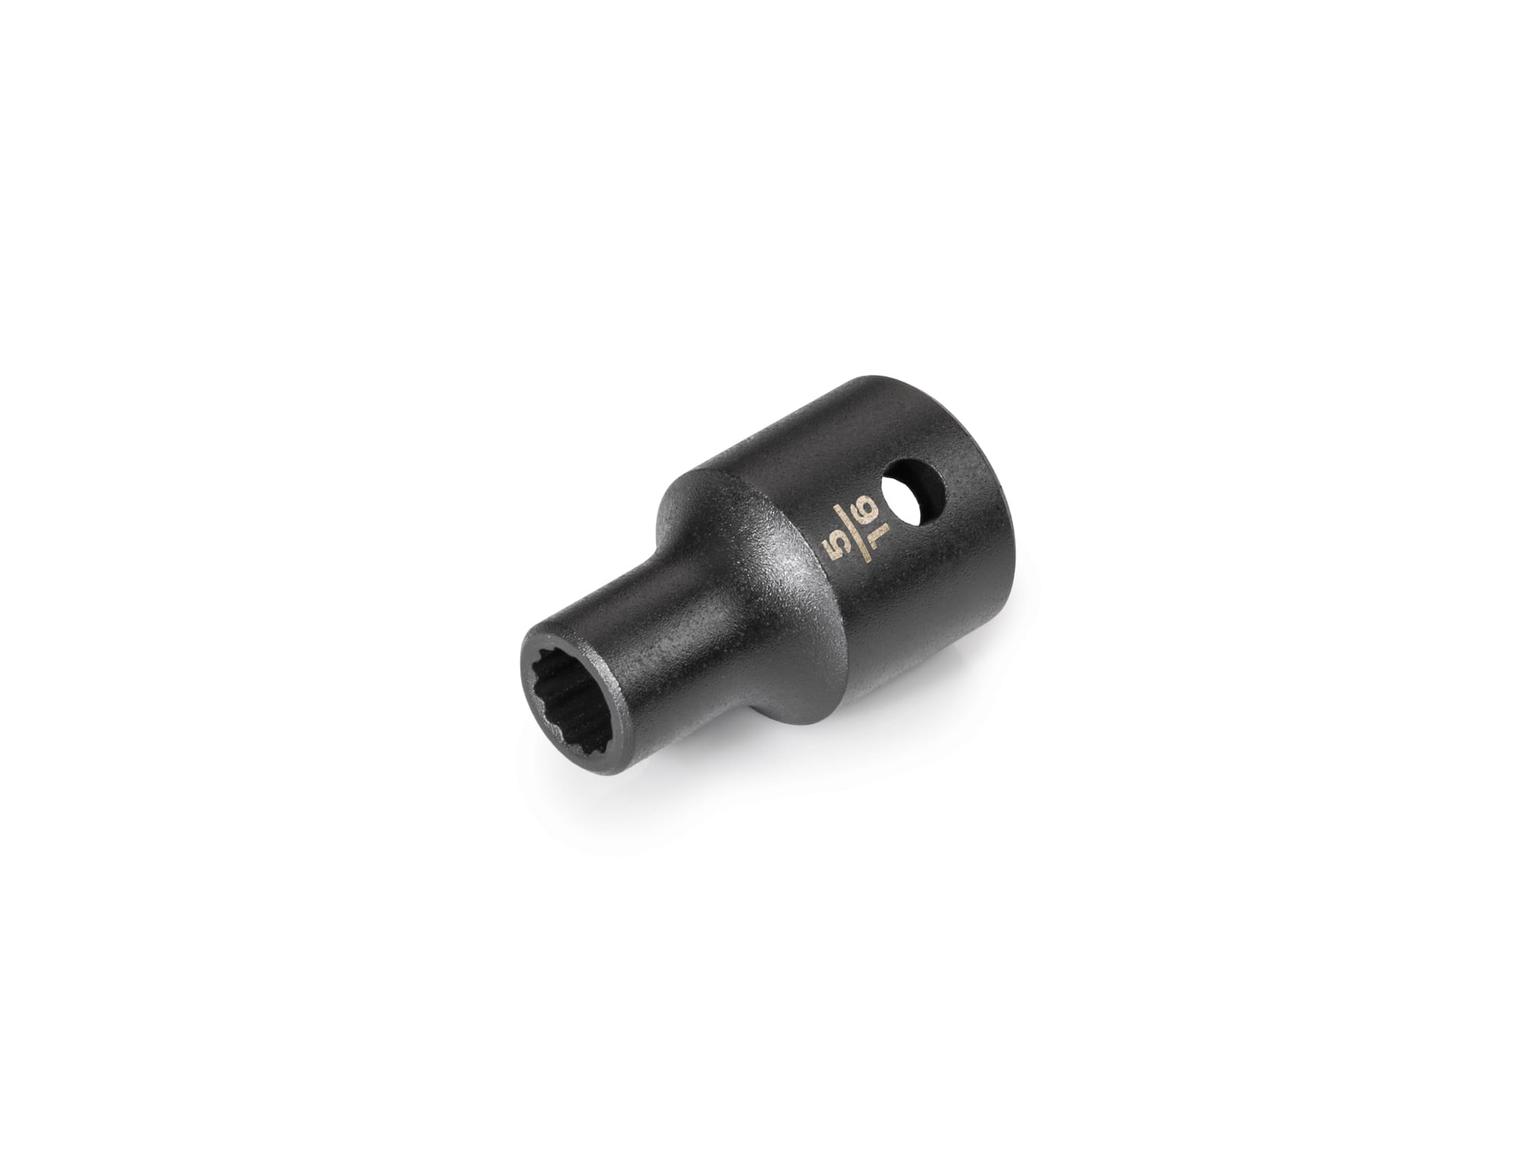 1/2 Inch Drive 12-Point Impact Sockets